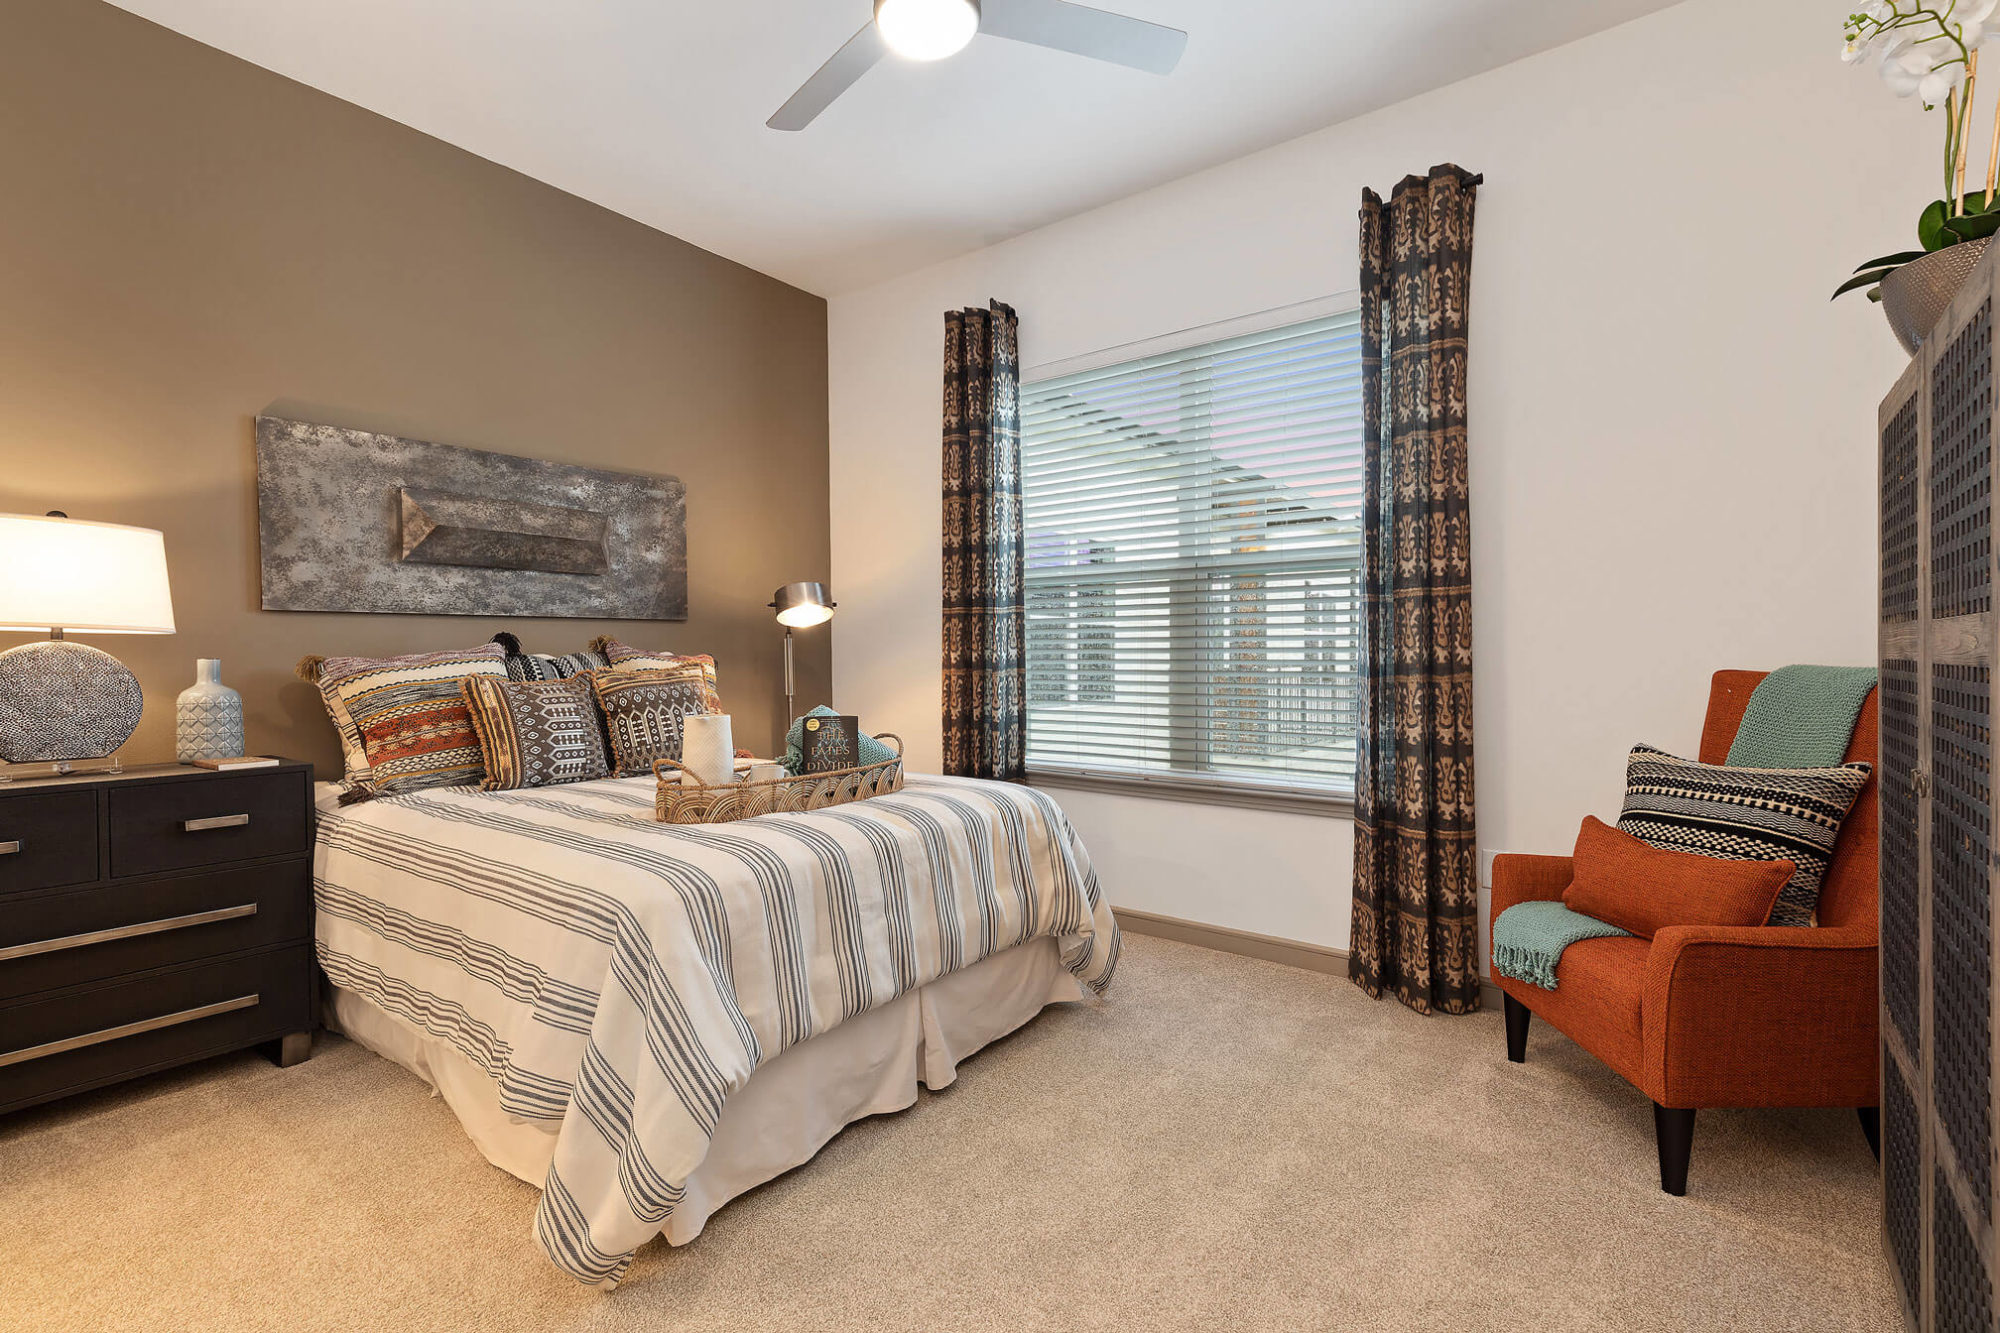 Bedroom with tan accent wall, large window, queen sized bed, large dresser, plush carpet and ceiling fan